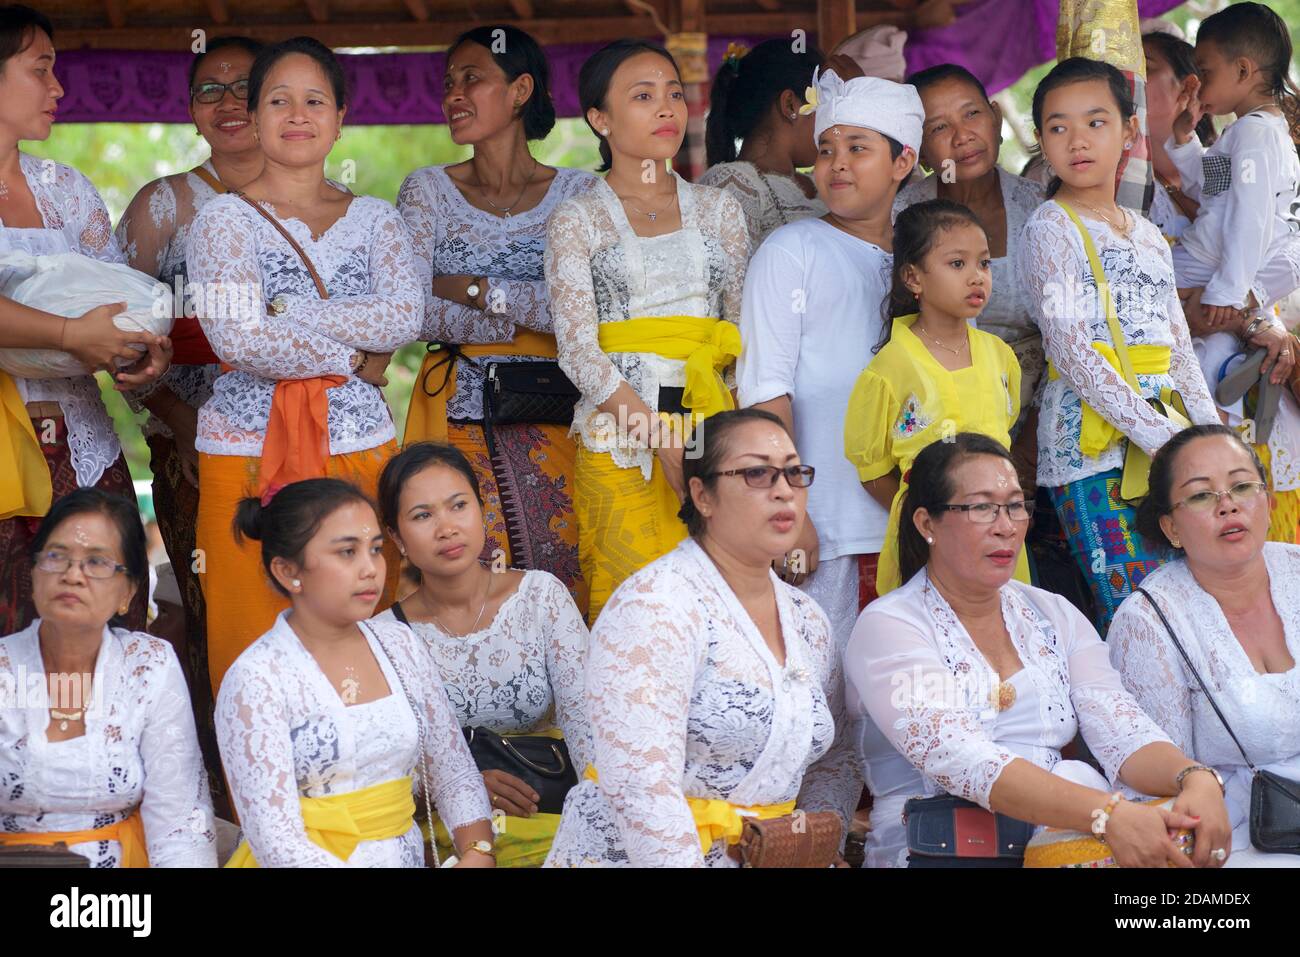 Balinese group mainly women, in festive dress for celebrations to mark Galungan, Sakenan temple, Bali, Indonesia Stock Photo